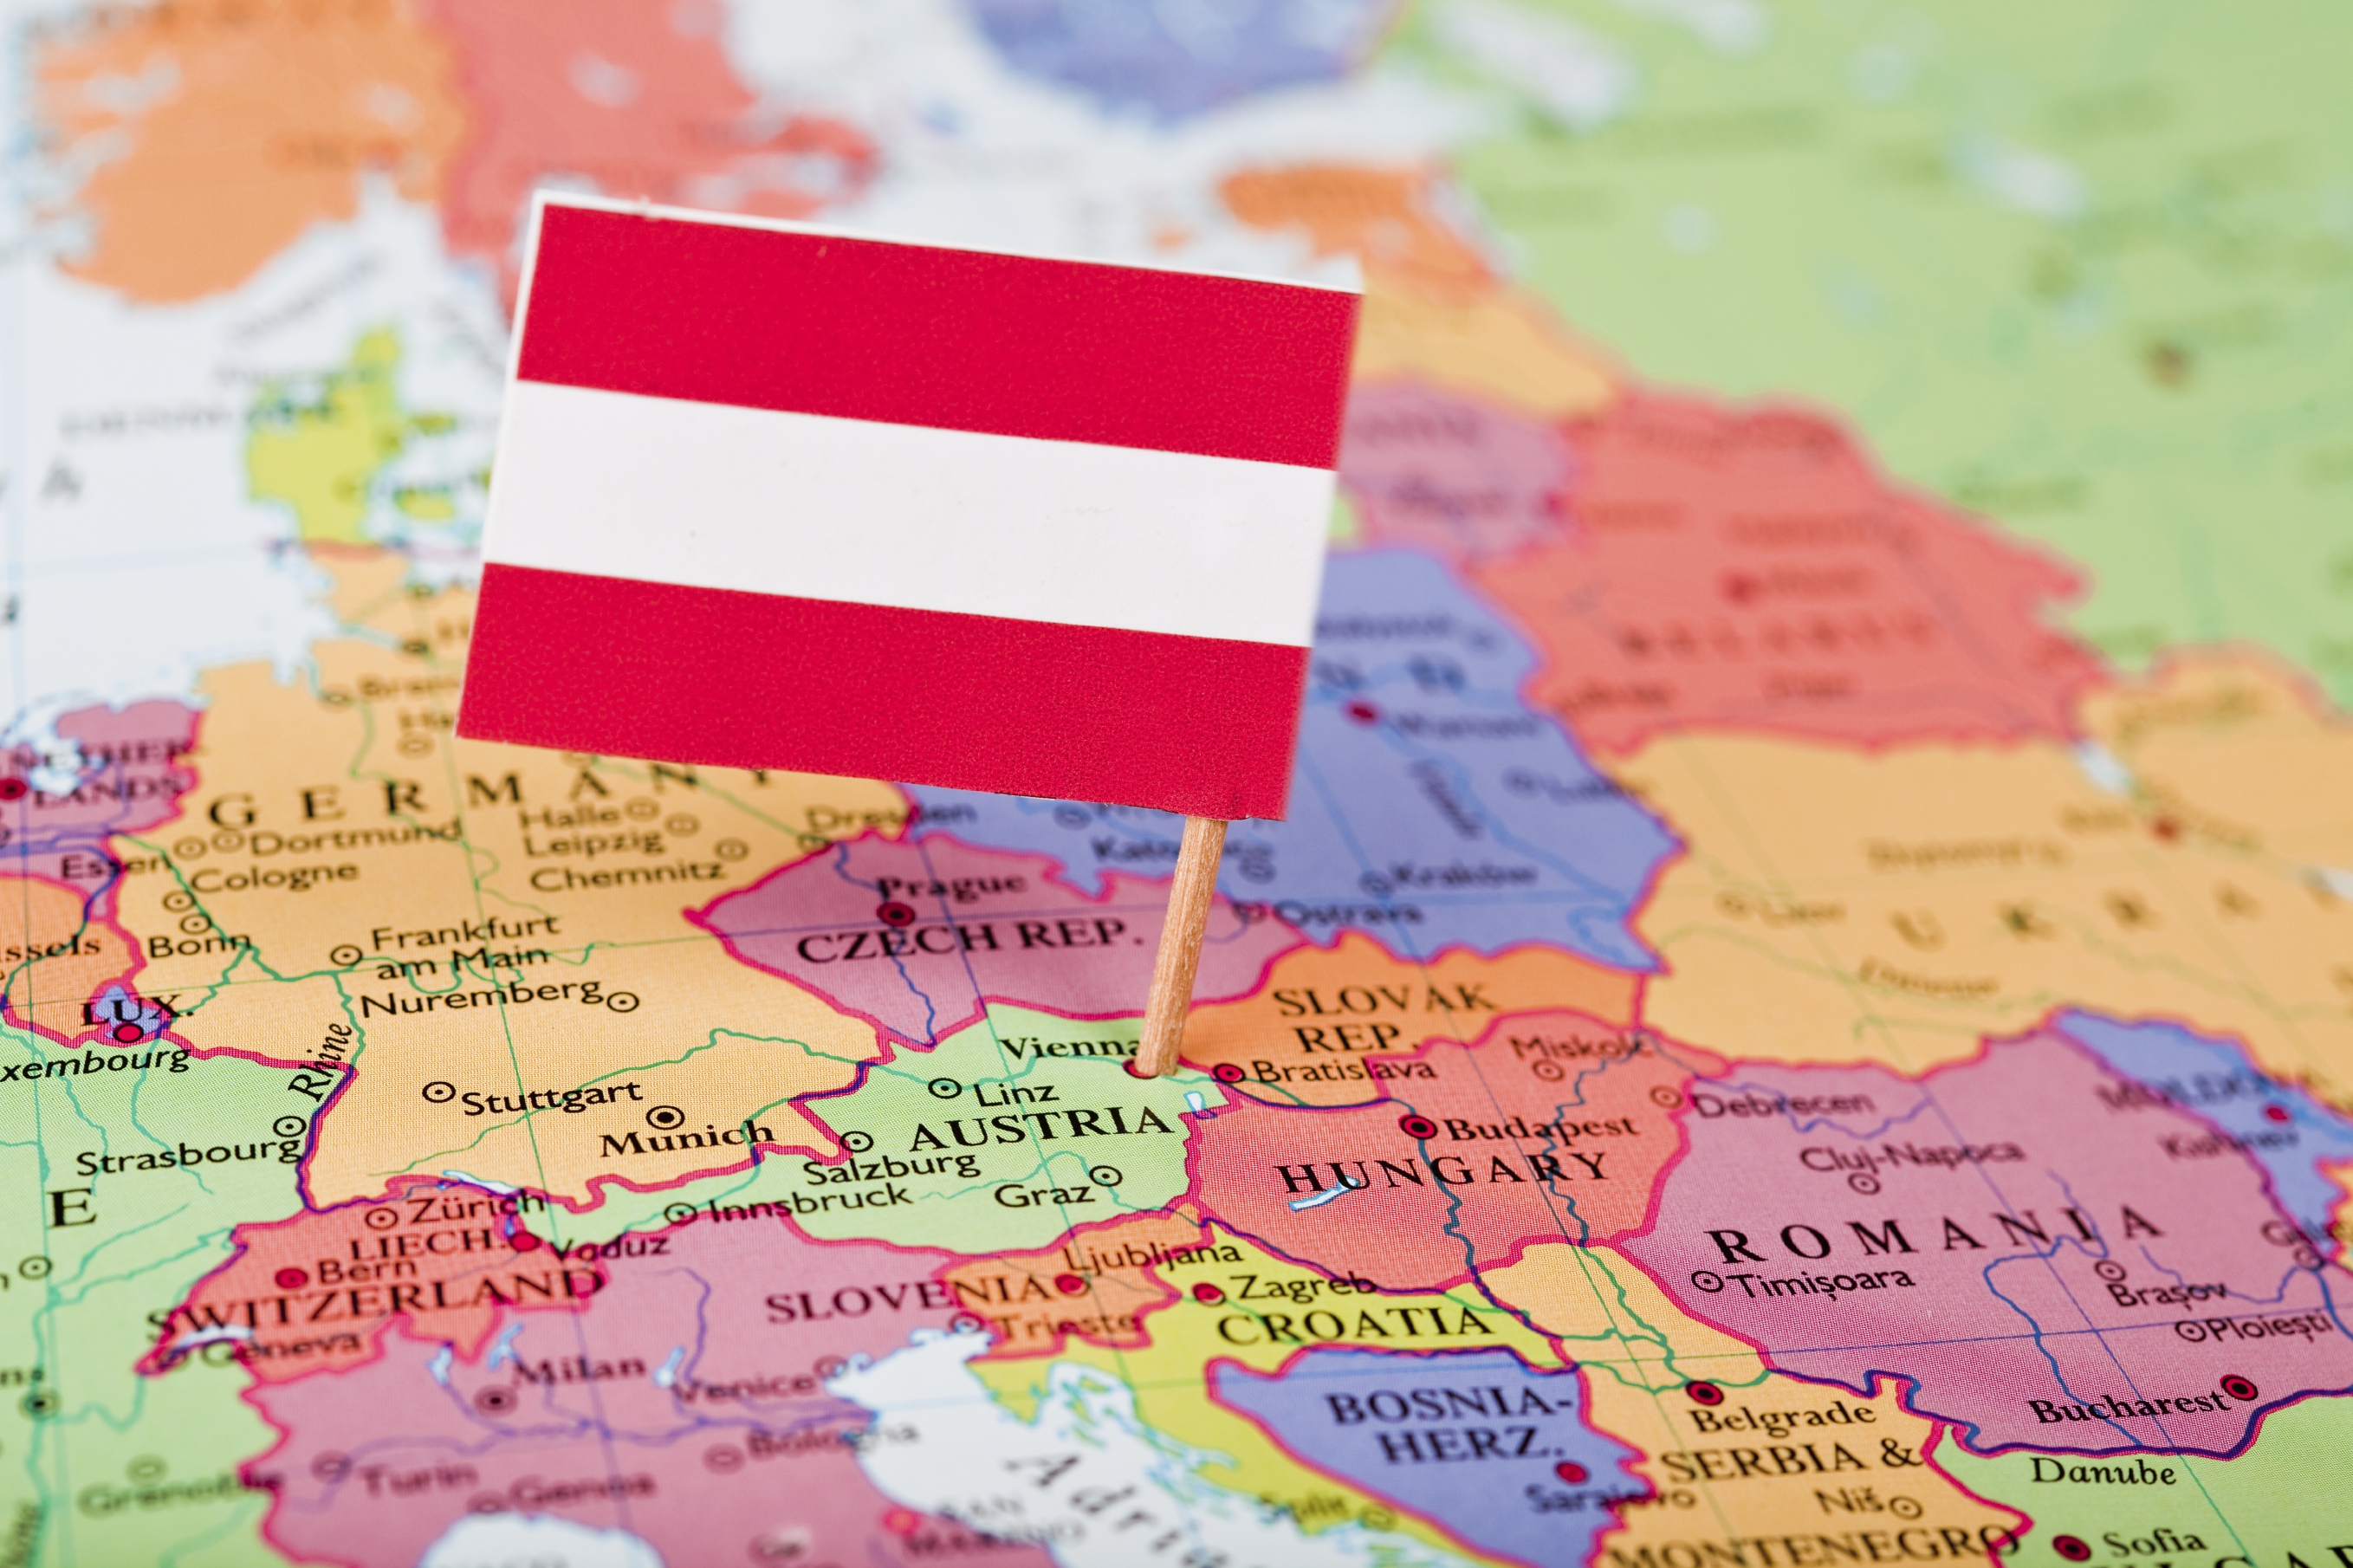 A labour economics point of view on the Austrian reform process. A report on Austria by Synthesis Research in collaboration with the Federal Ministry of Economics and Labour.